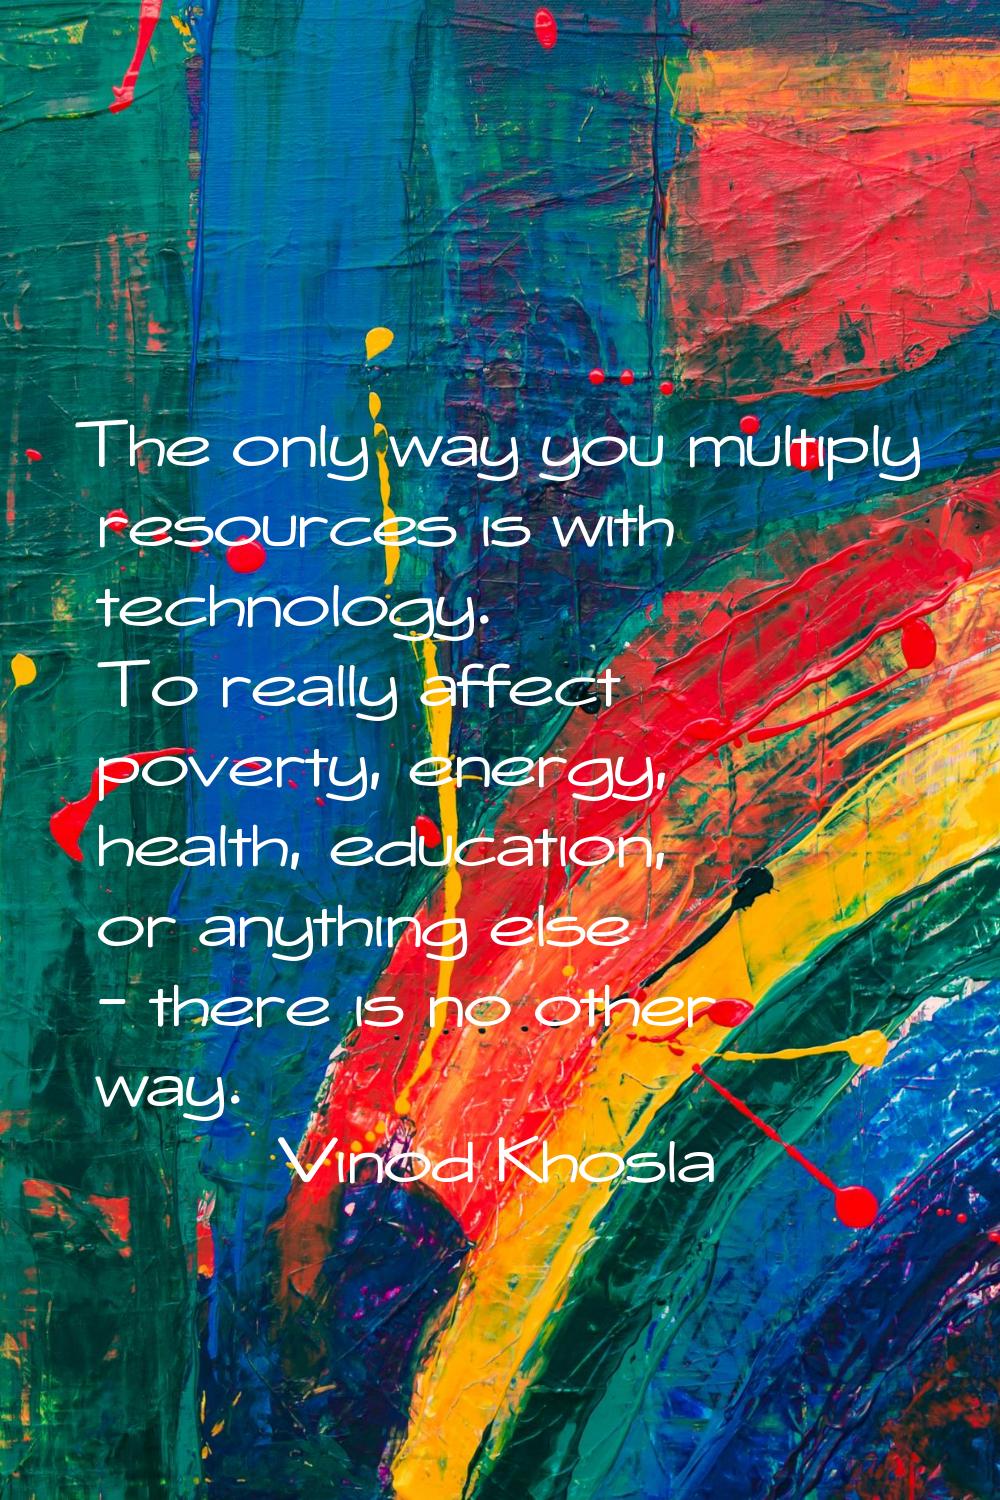 The only way you multiply resources is with technology. To really affect poverty, energy, health, e